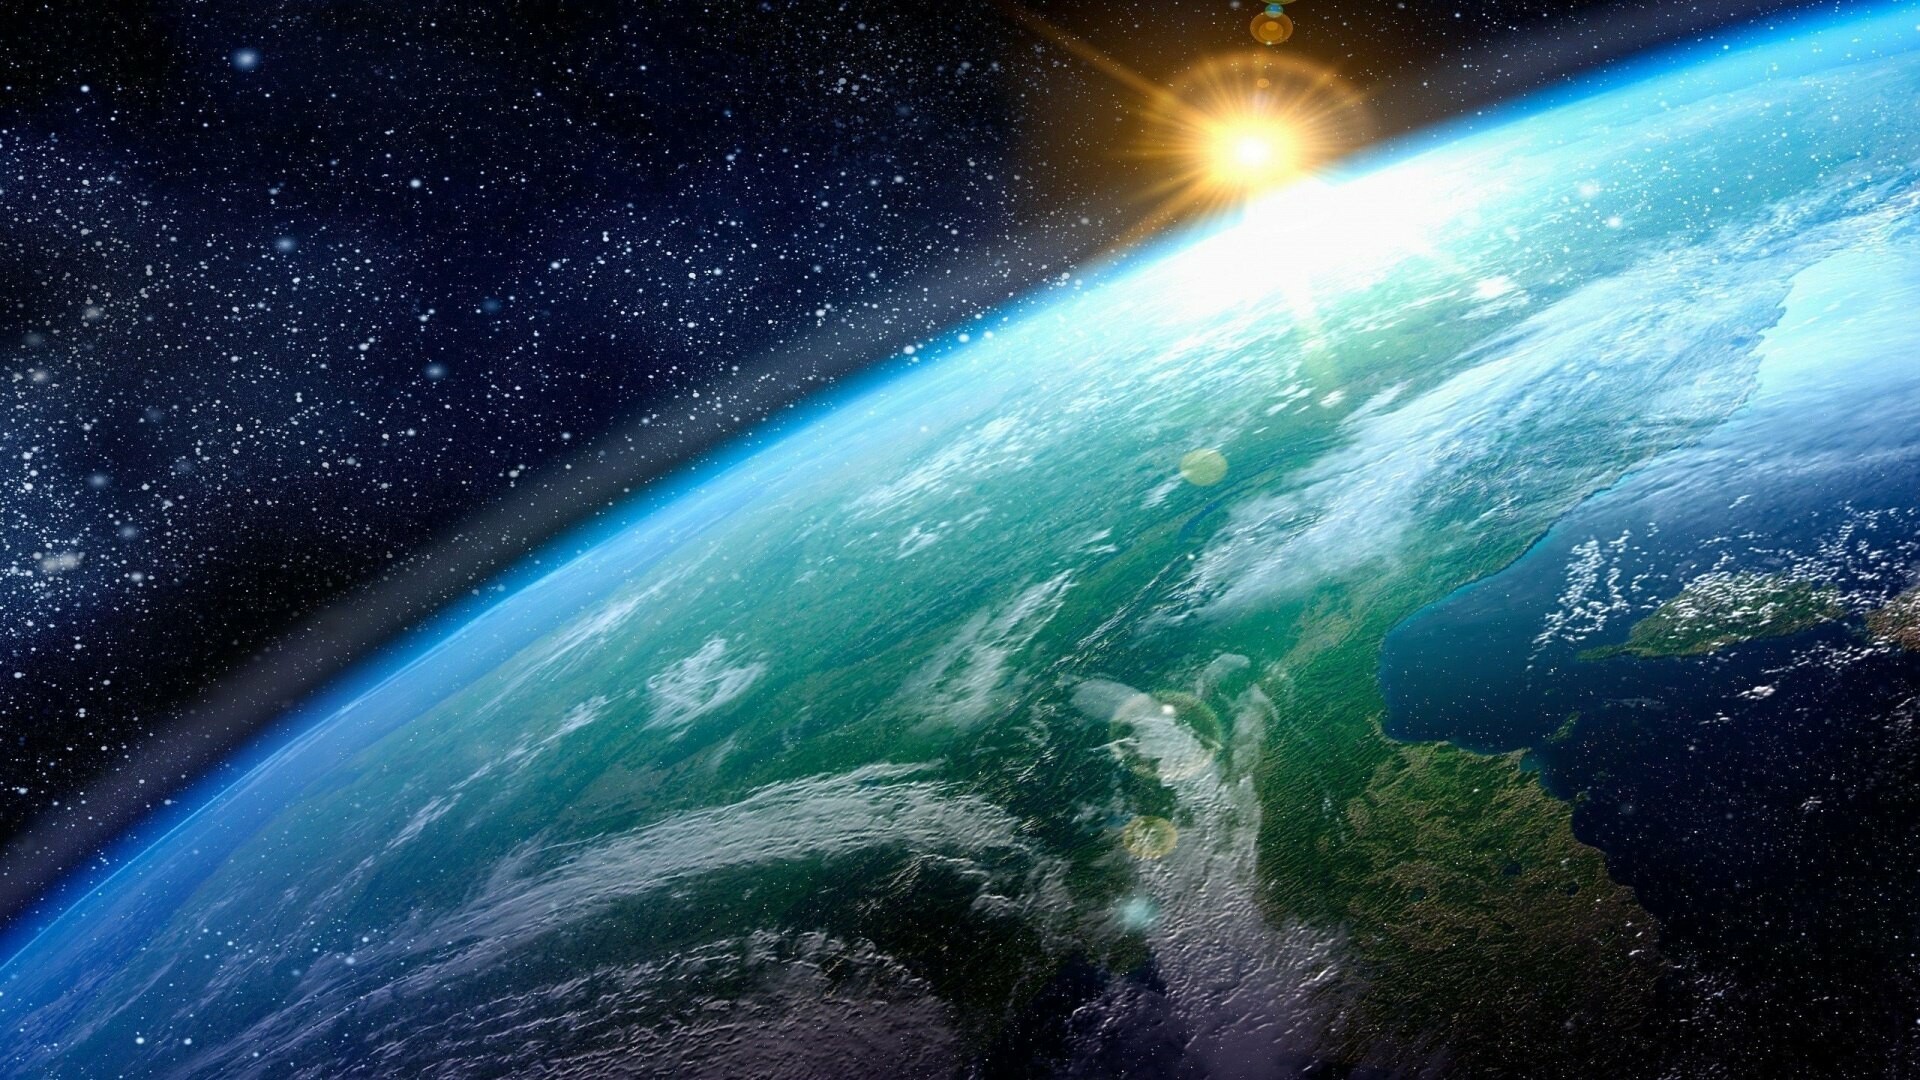 Sun on earth's surface HD wallpaper | HD Latest Wallpapers